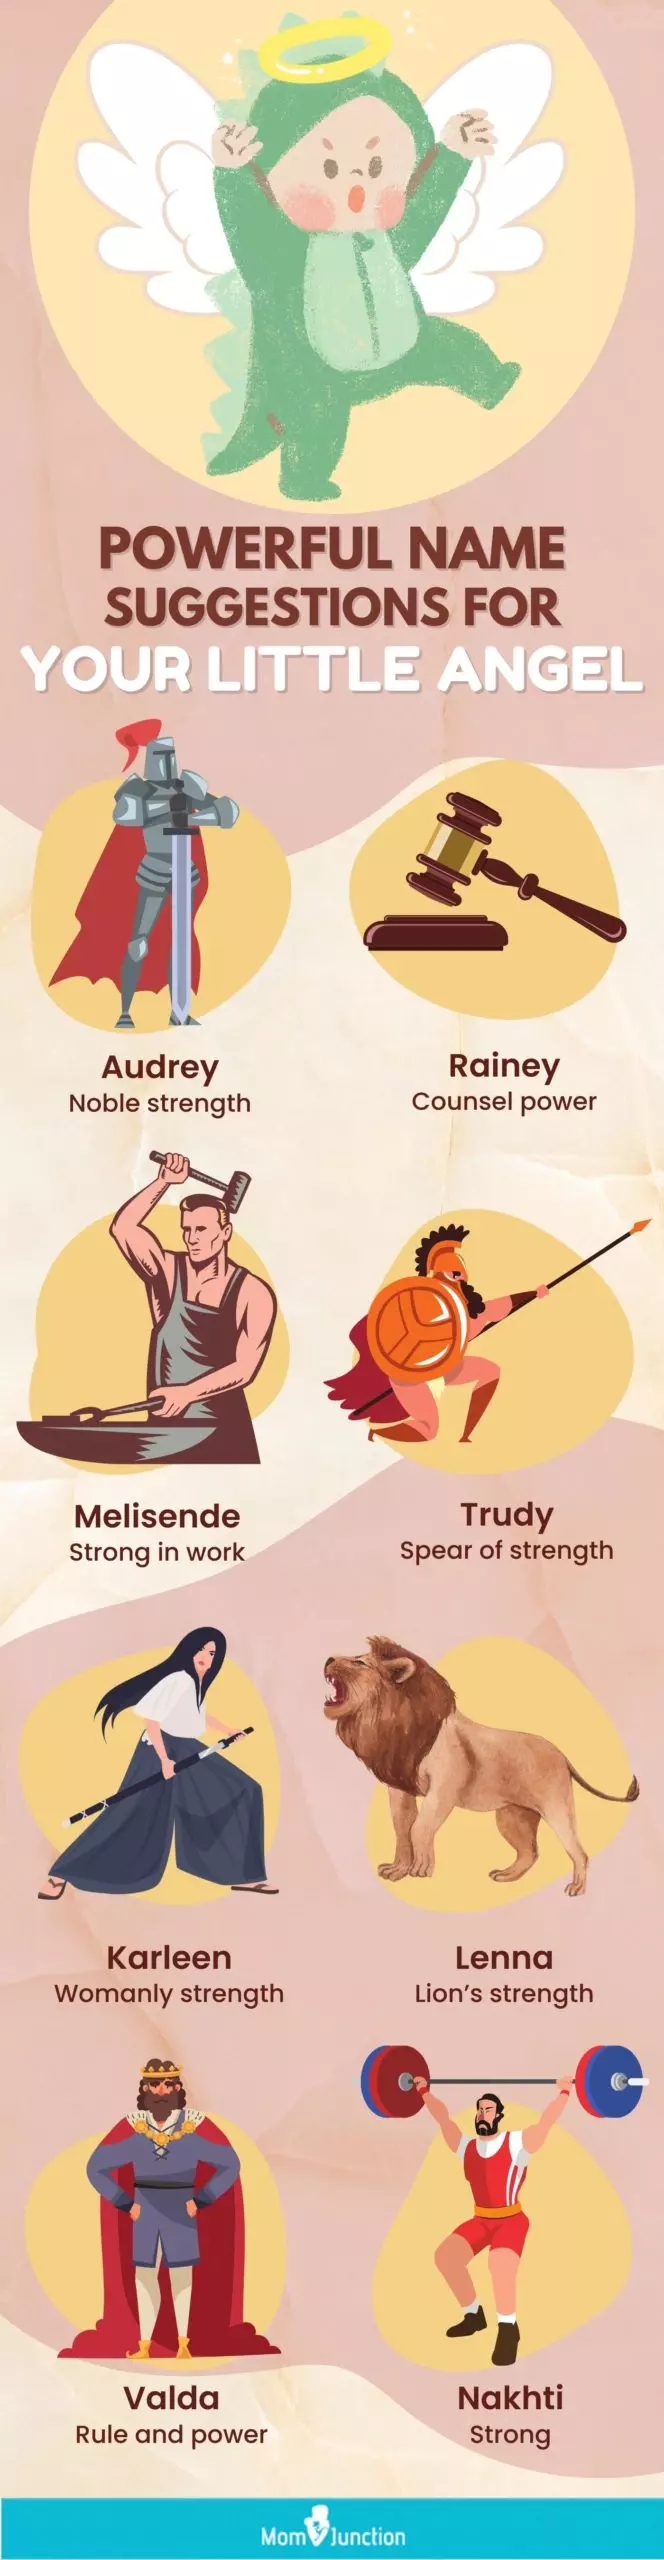 powerful name suggestions for your little angel (infographic)